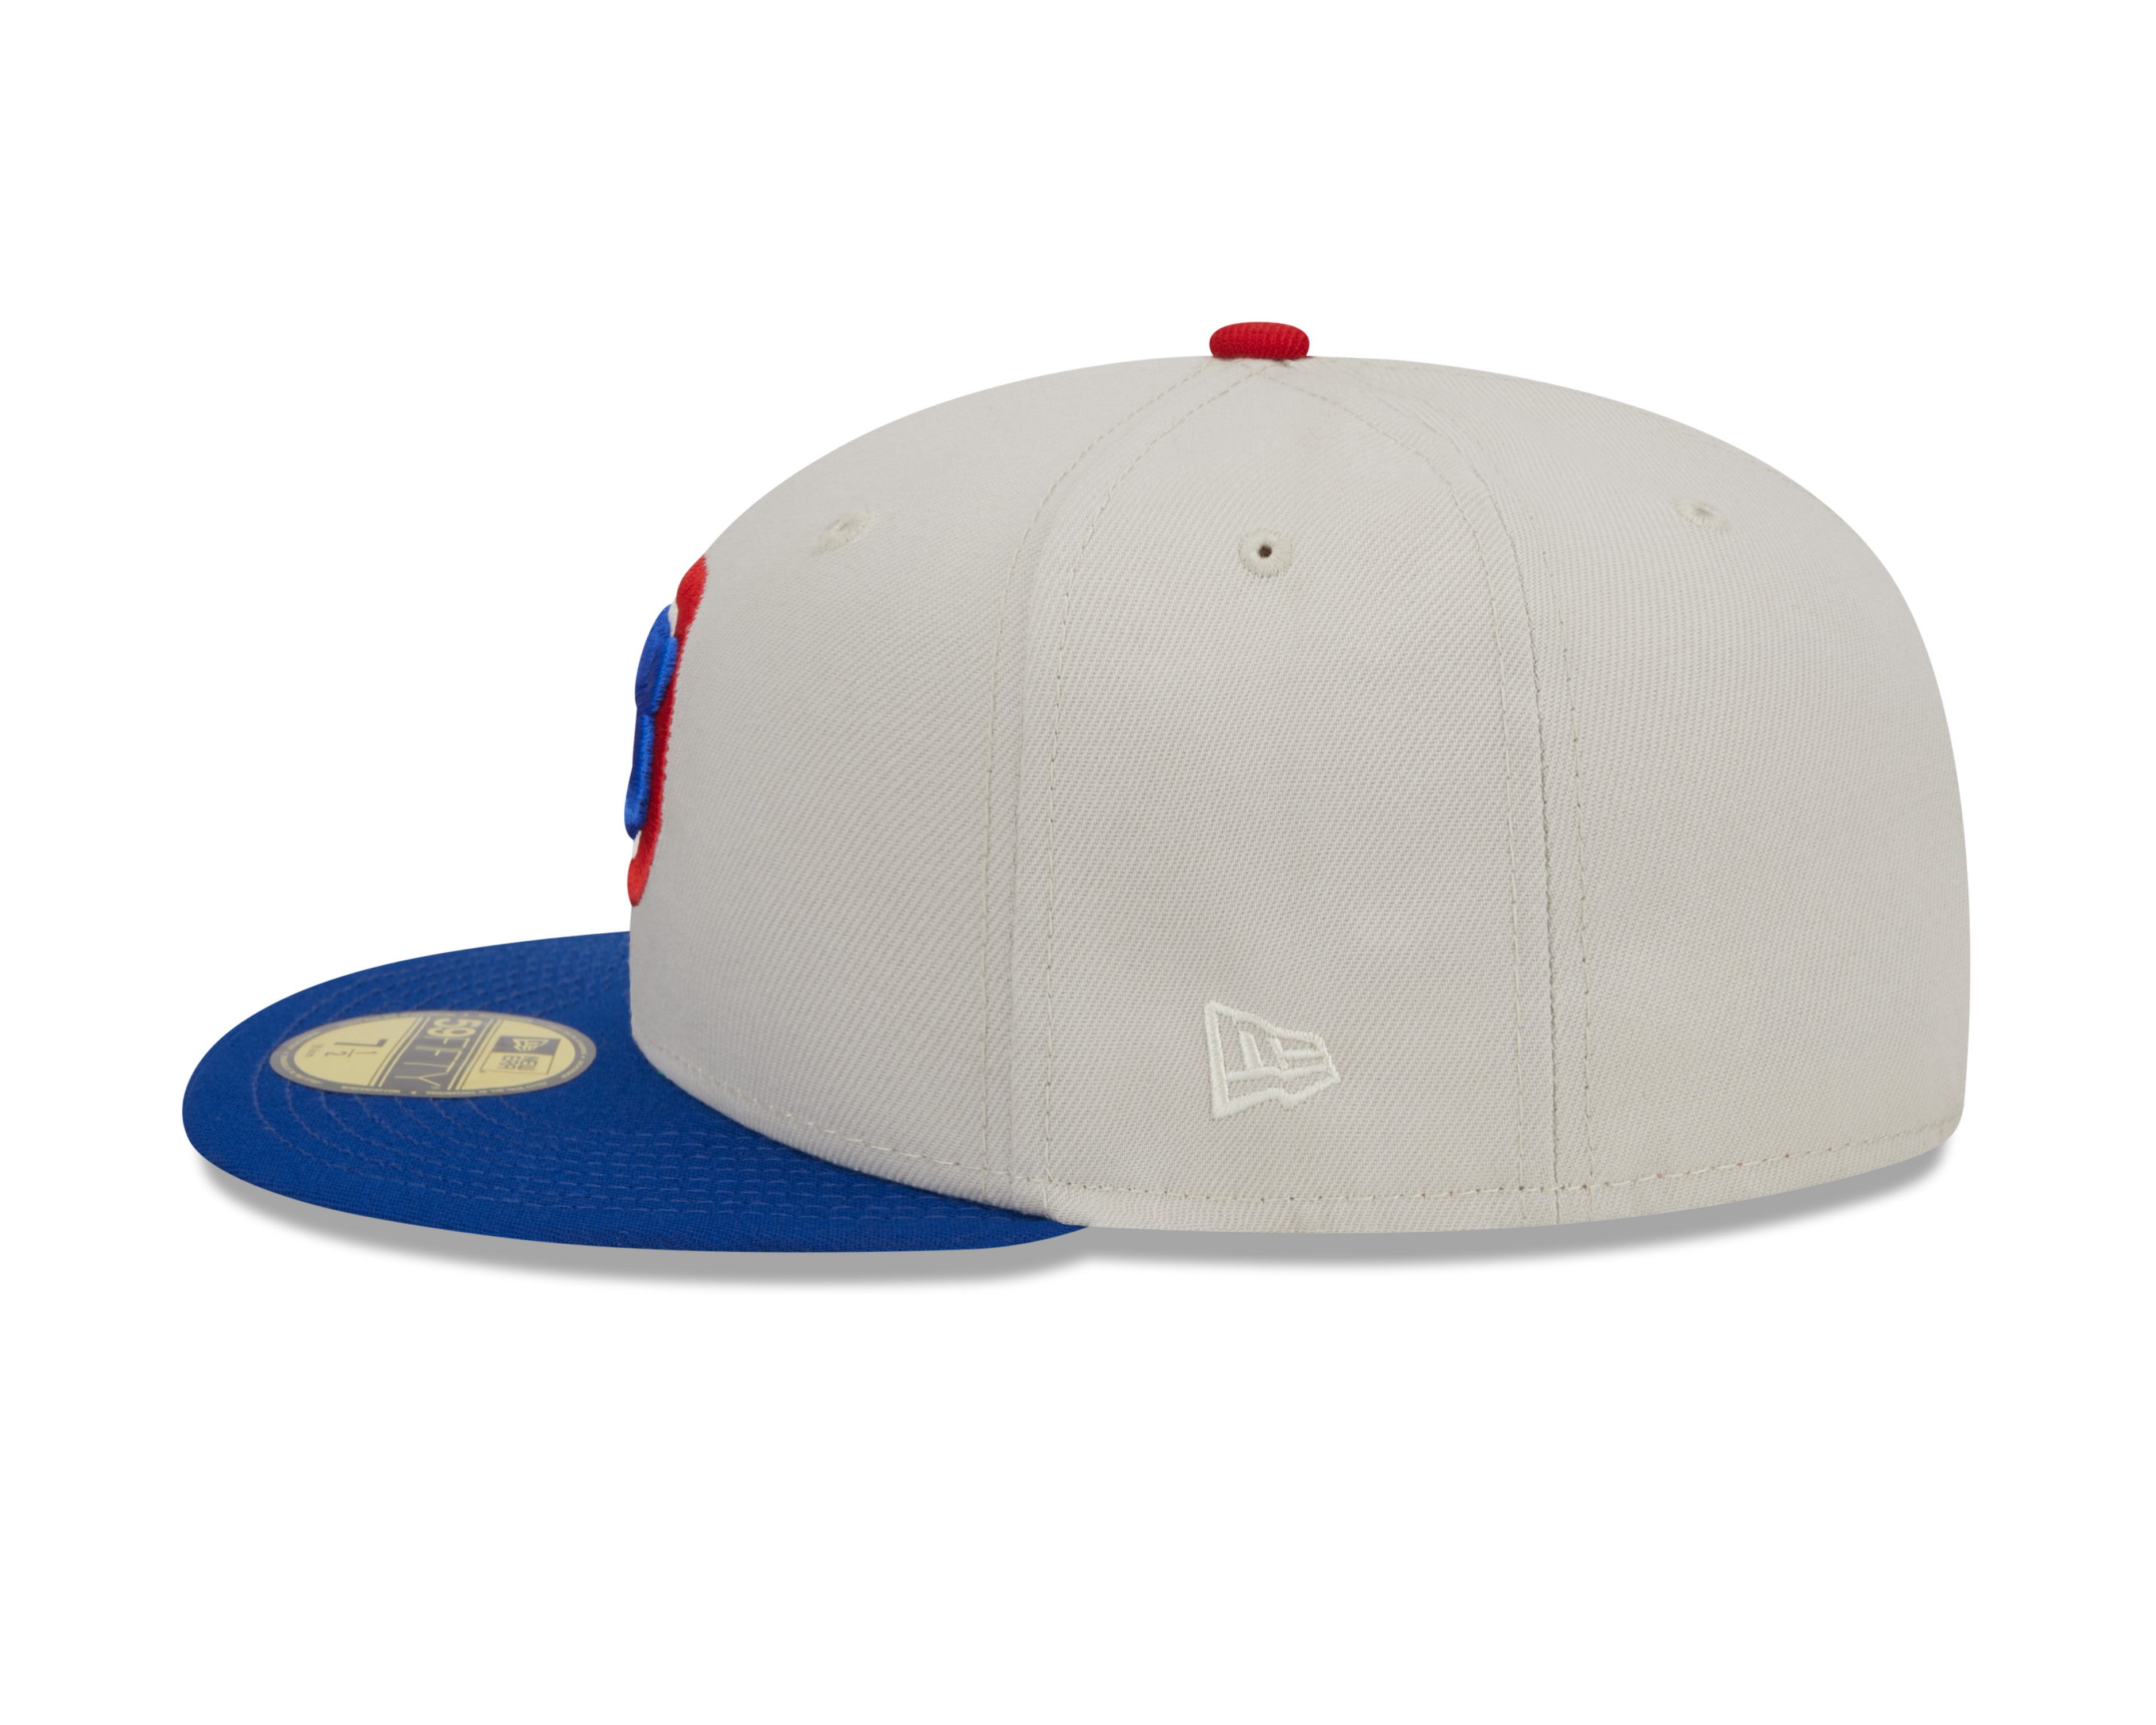 New Era - Chicago Cubs - 59Fifty Fitted - FARM TEAM - Stone - Headz Up 